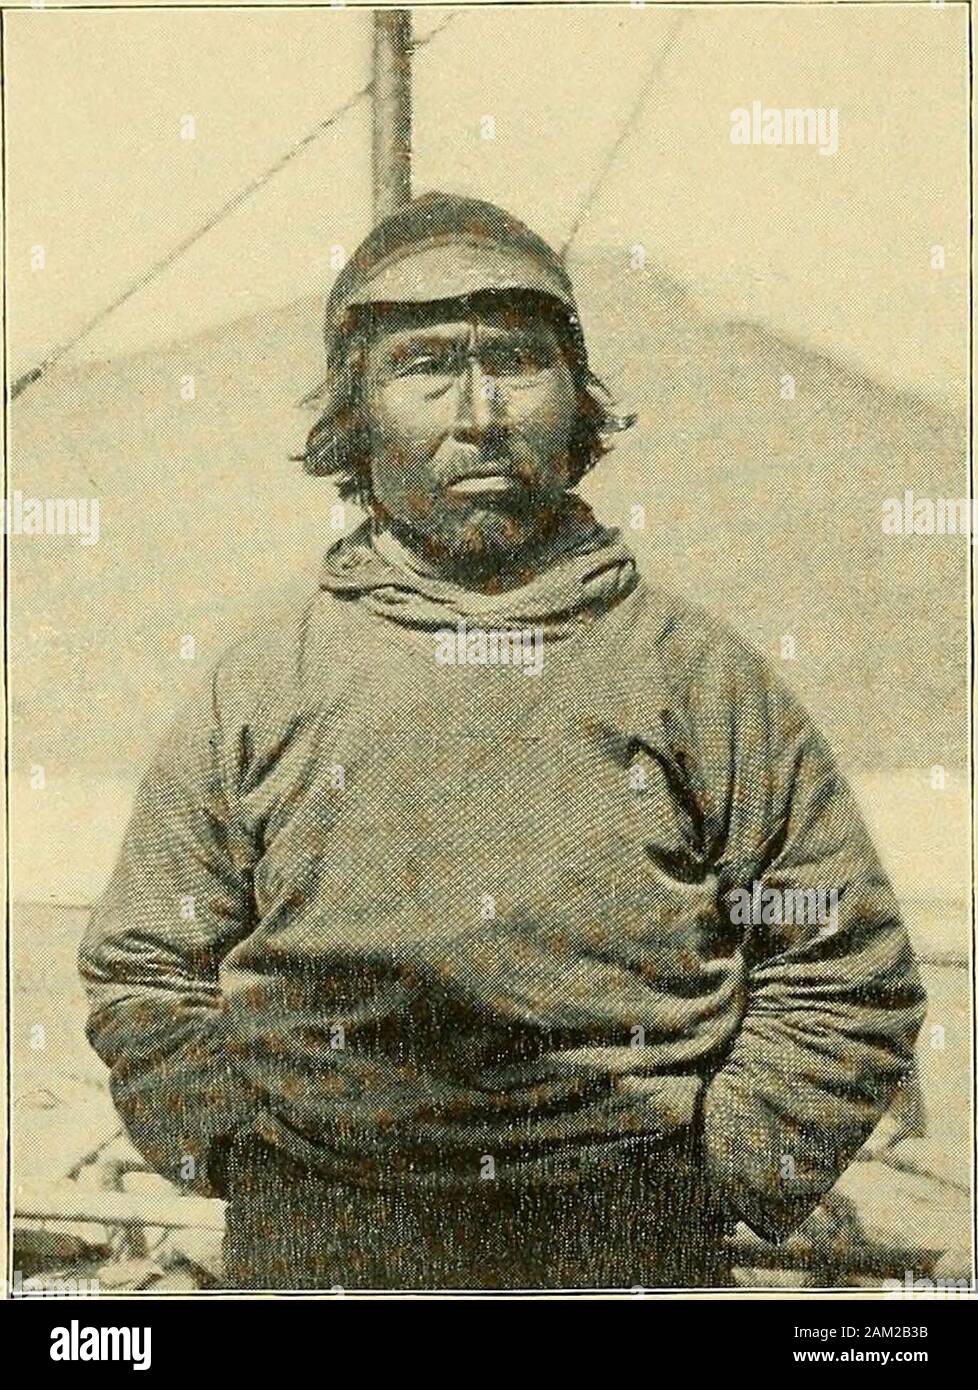 Northward over the great ice : a narrative of life and work along the shores and upon the interior ice-cap of northern Greenland in the years 1886 and 1891-1897, with a description of the little tribe of Smith Sound Eskimos, the most northerly human beings in the world, and an account of the discovery and bringing home of the Saviksue or great Cape York meteorites . 875-76 Expedition, as pilotand interpreter. My plan, in outline, was to gain the border of theinterior ice at some point as near the north-east angle of Disco Bay as pos-sible, my preferencebeing the base ofNoursoak Peninsula,and t Stock Photo